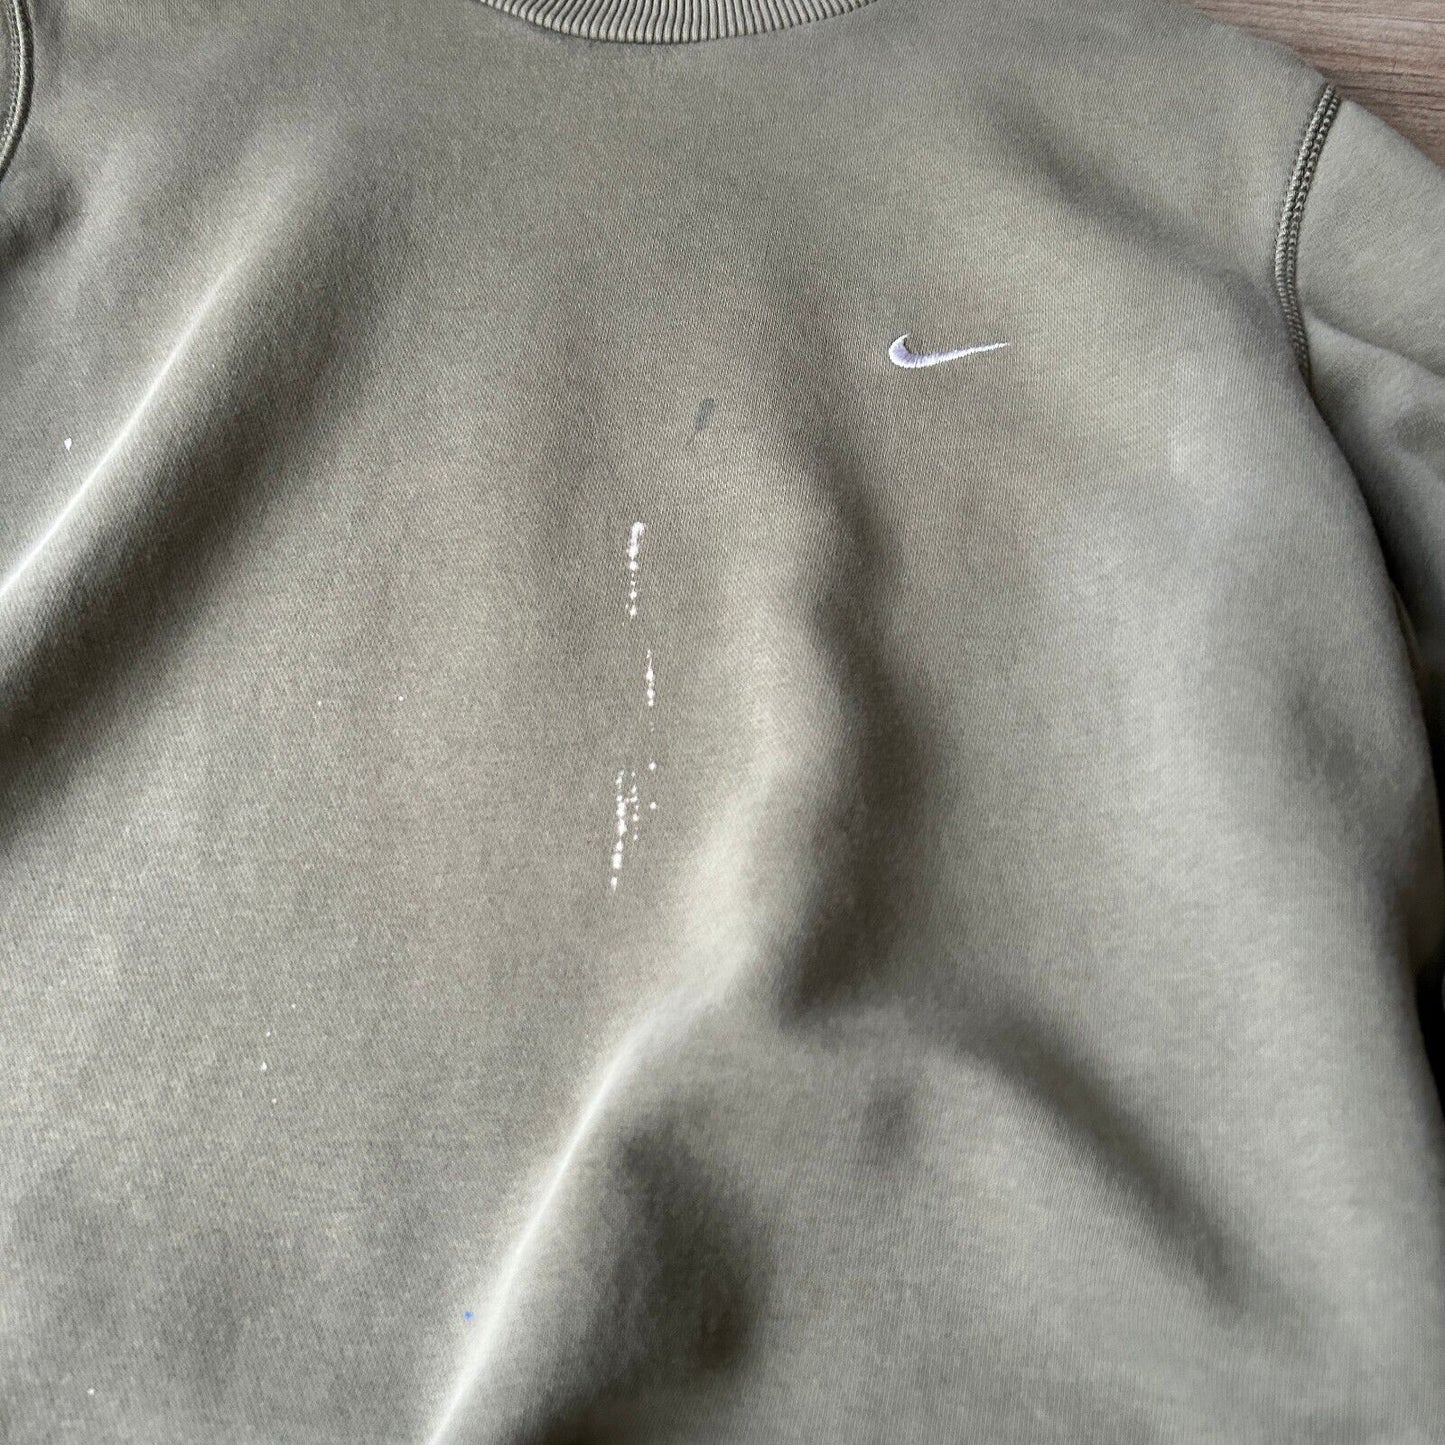 VINTAGE | NIKE Embroidered Small Swoosh Olive Green Crewneck Sweater sz M Adult